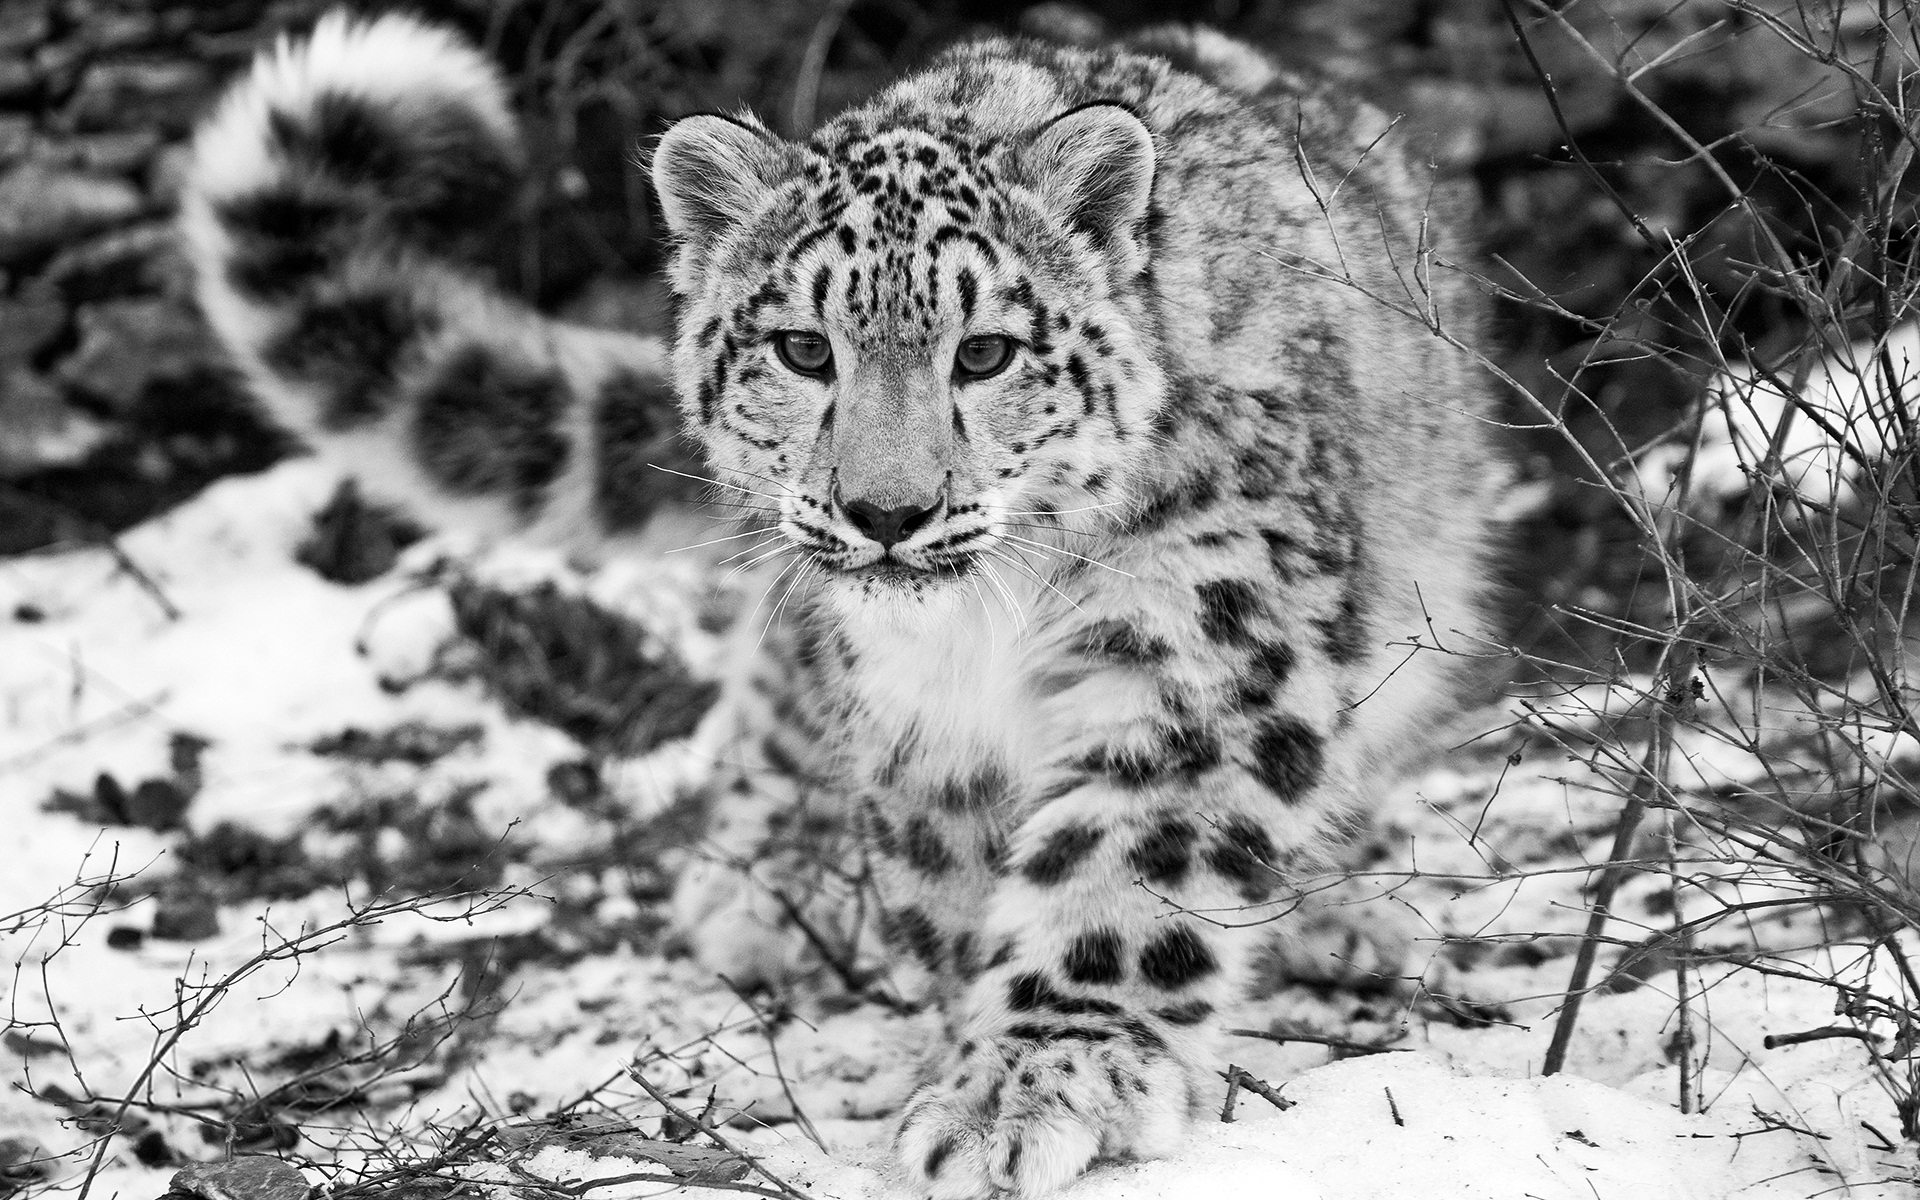 Snow leopard is living in plateau area and its named by living near